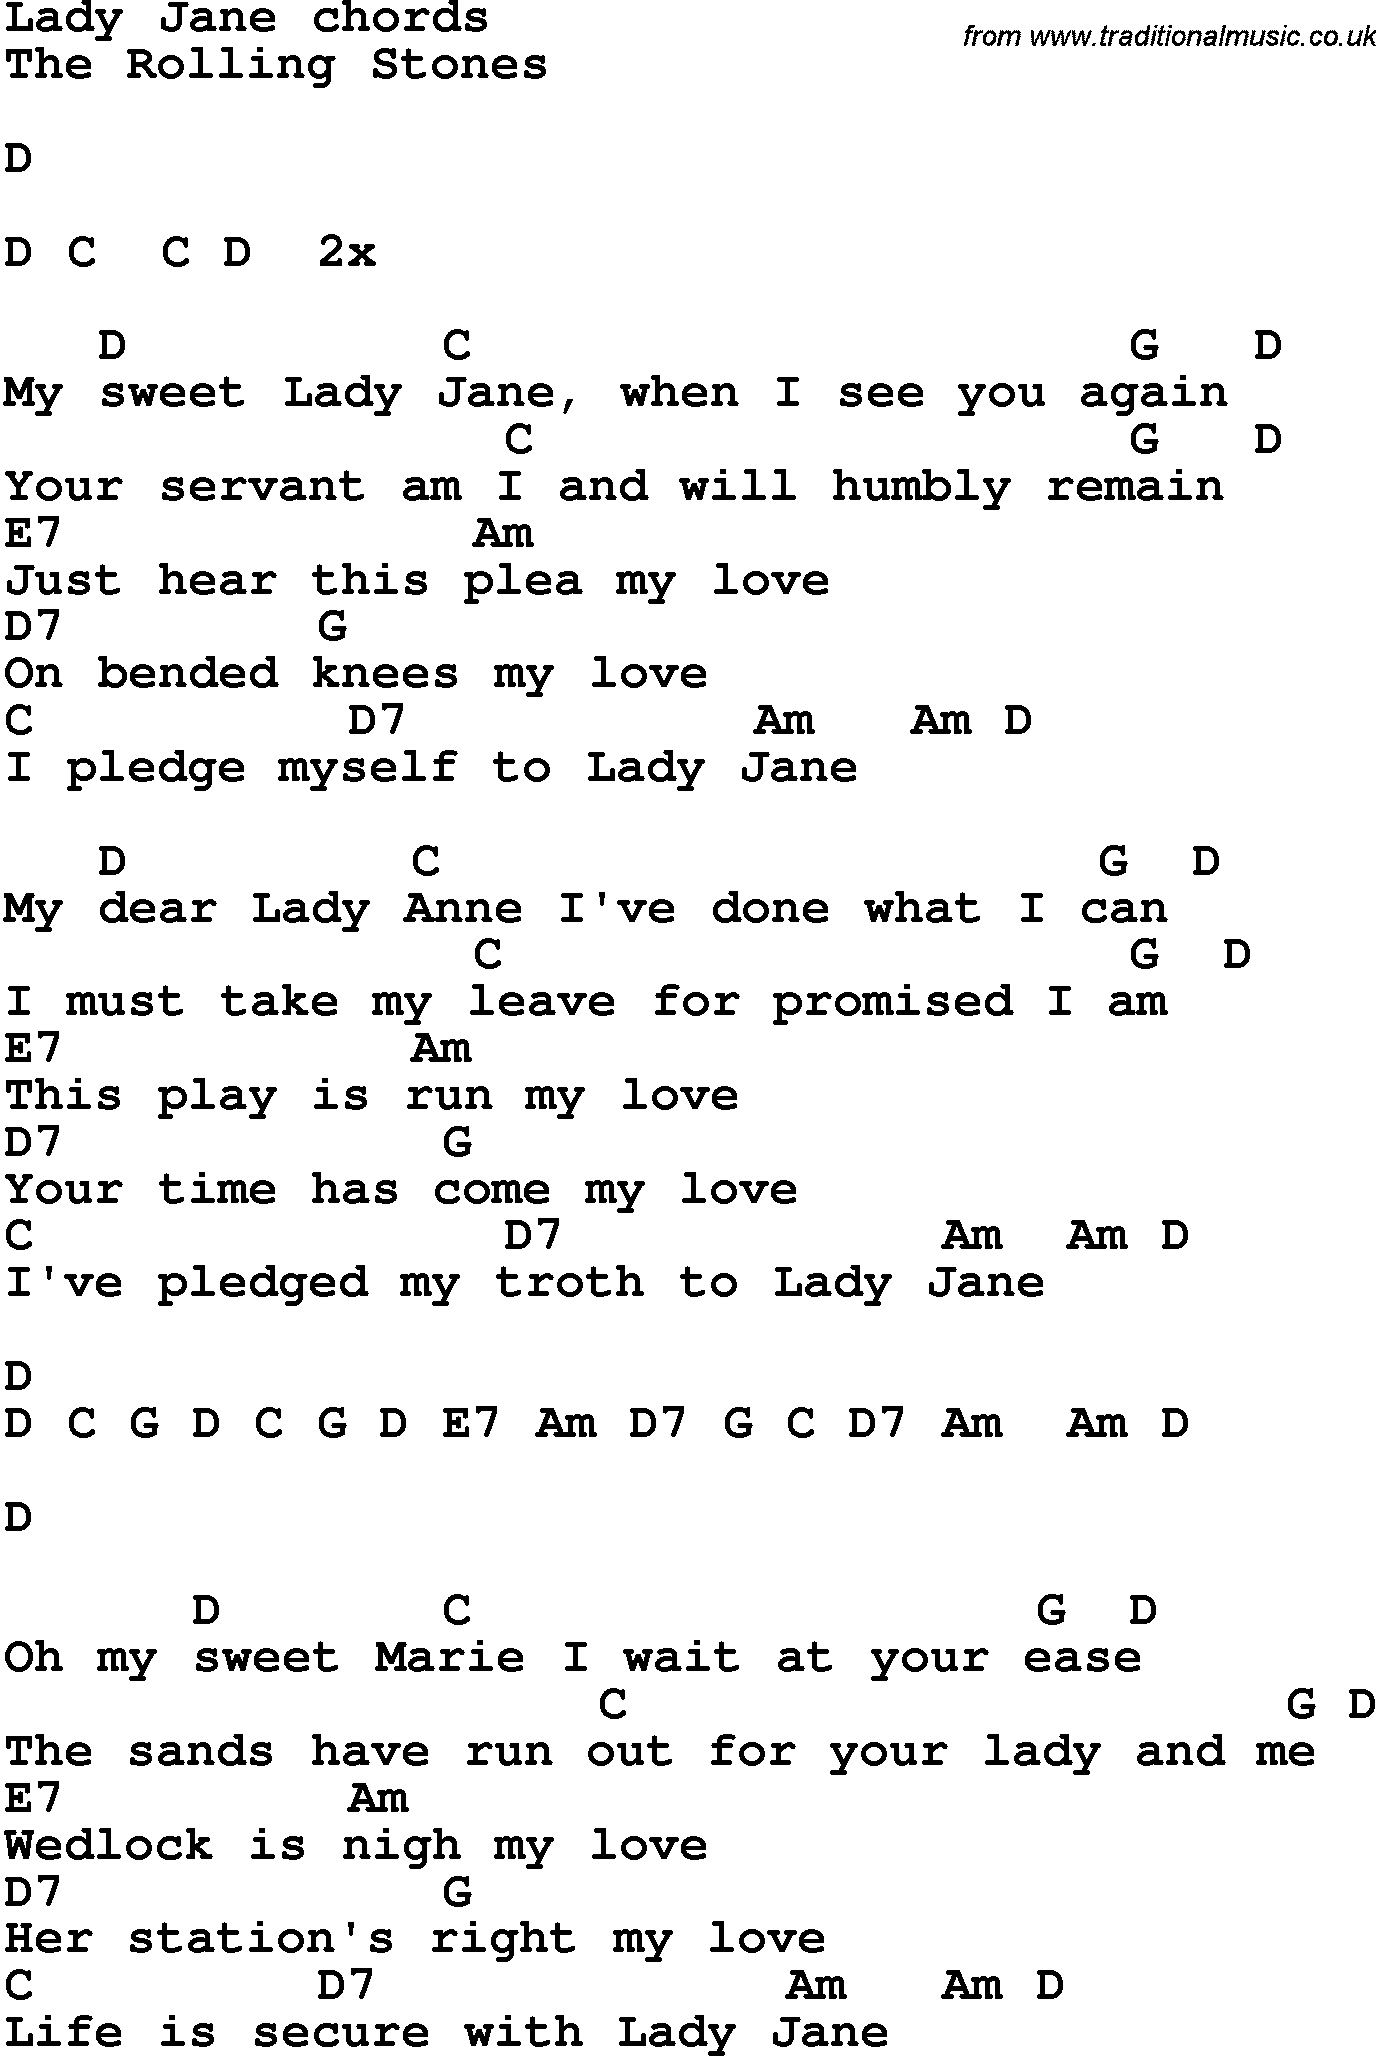 Song Lyrics with guitar chords for Lady Jane